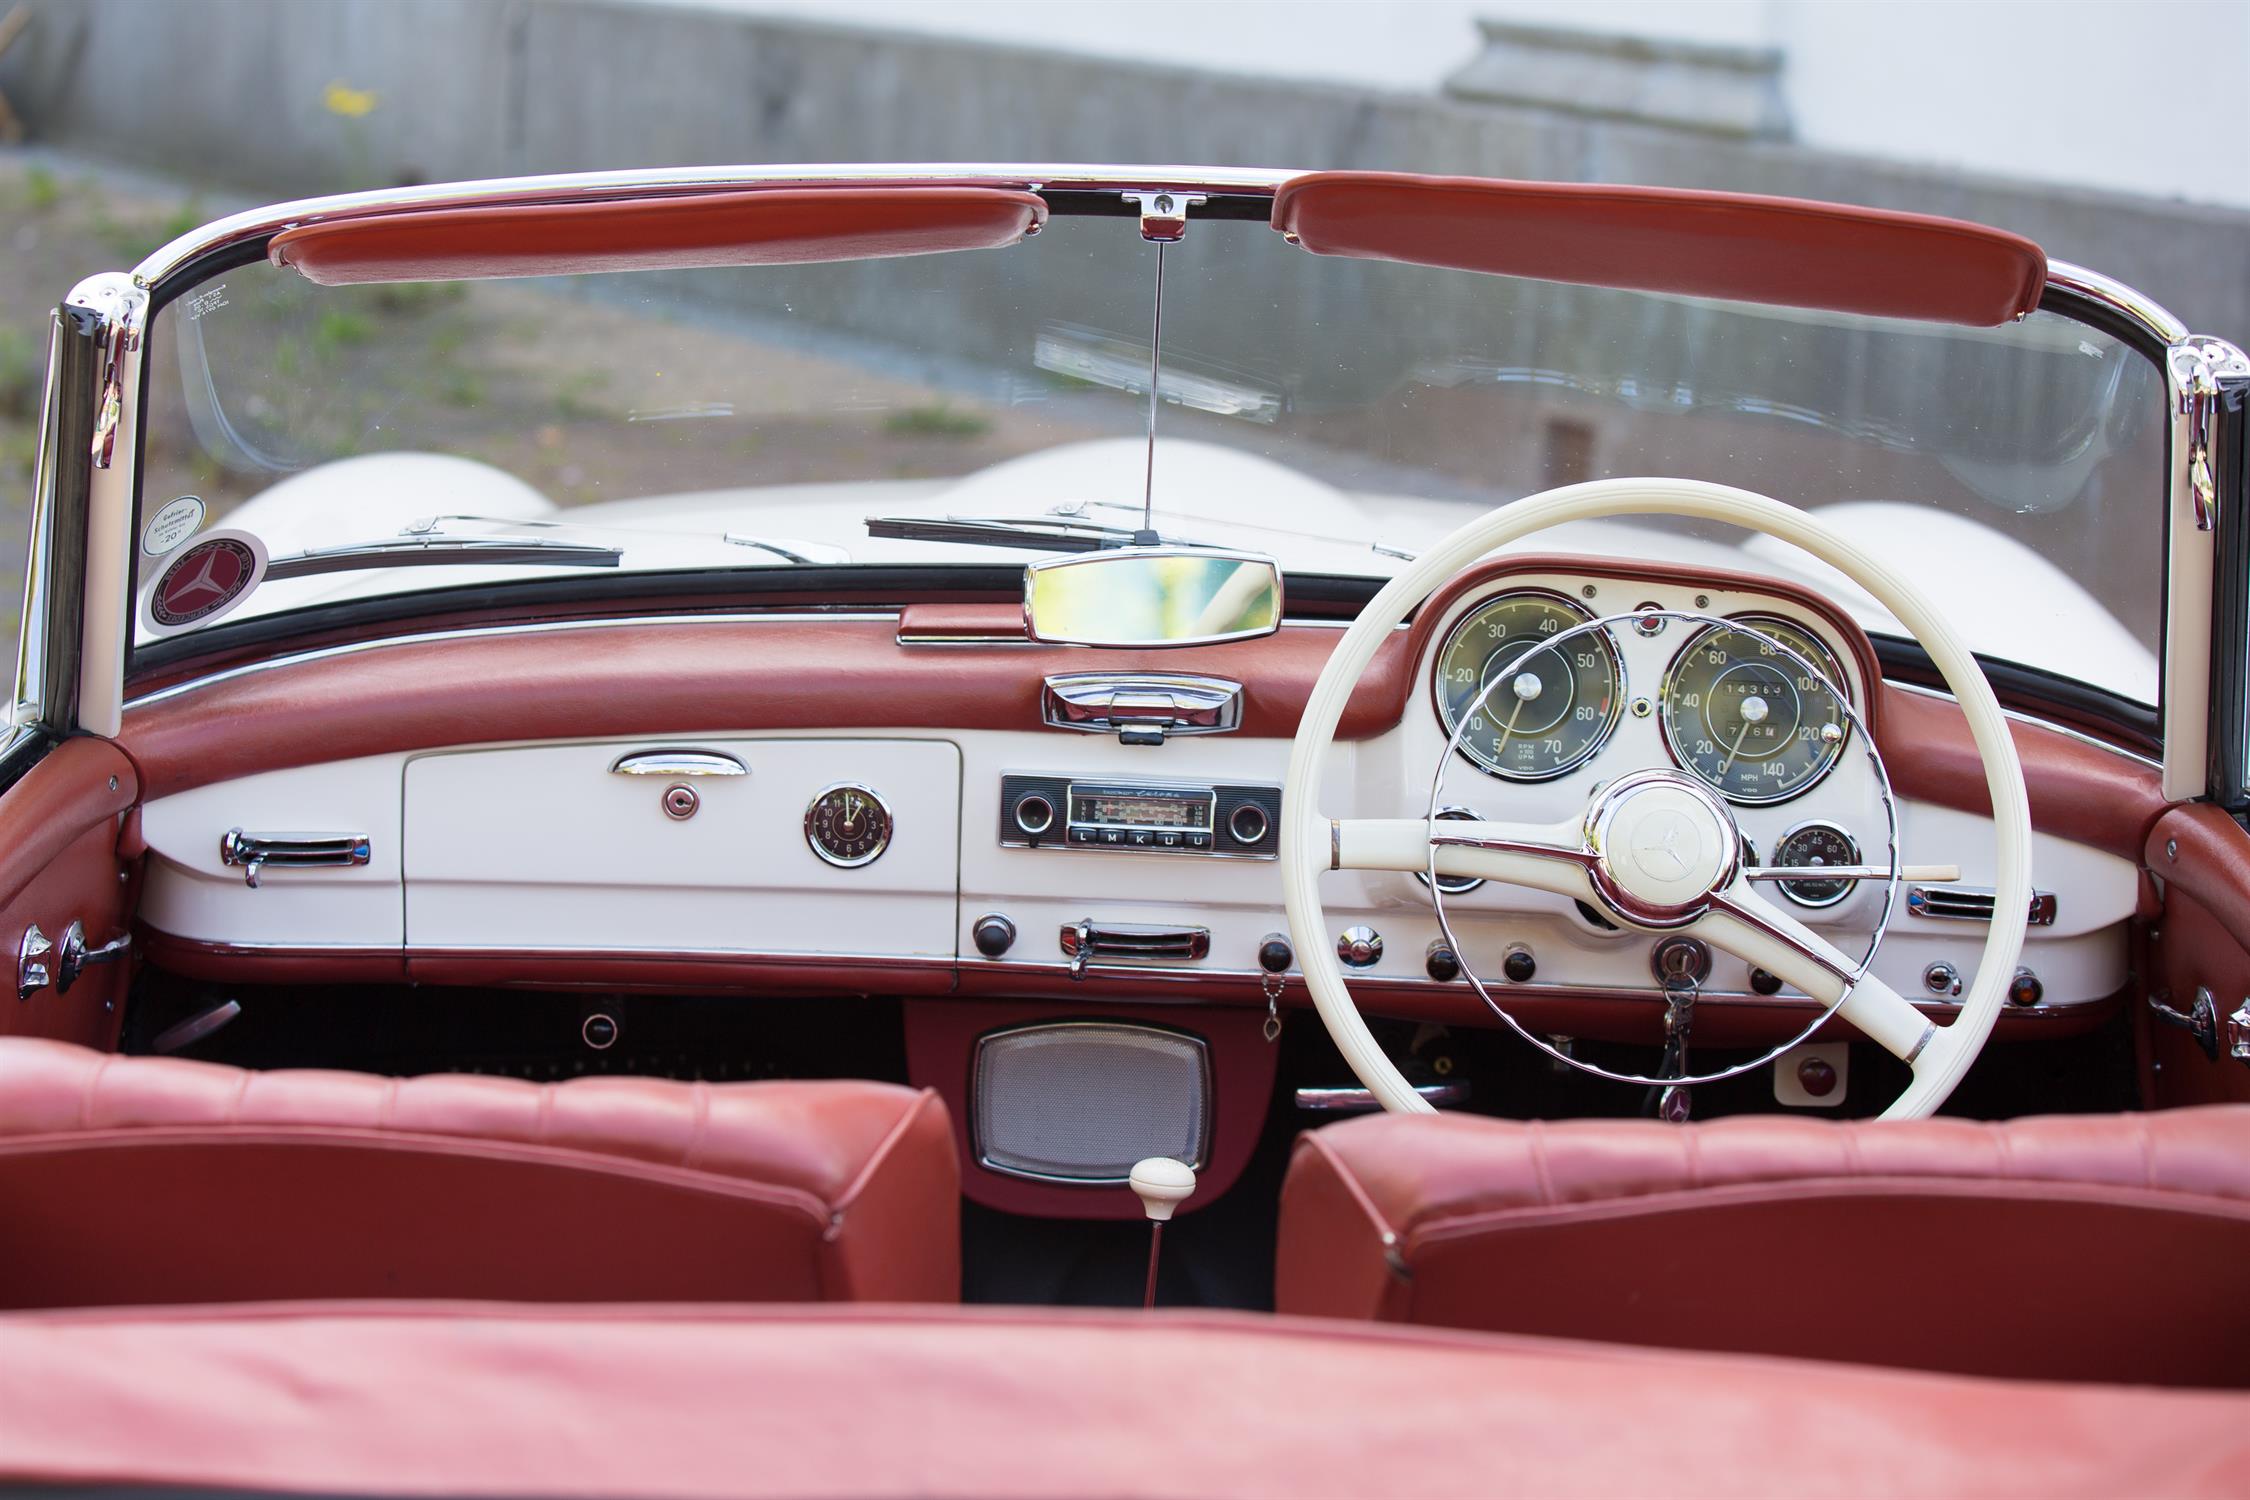 1962 Mercedes-Benz 190 SL with Hardtop - Right-Hand Drive - Image 8 of 19